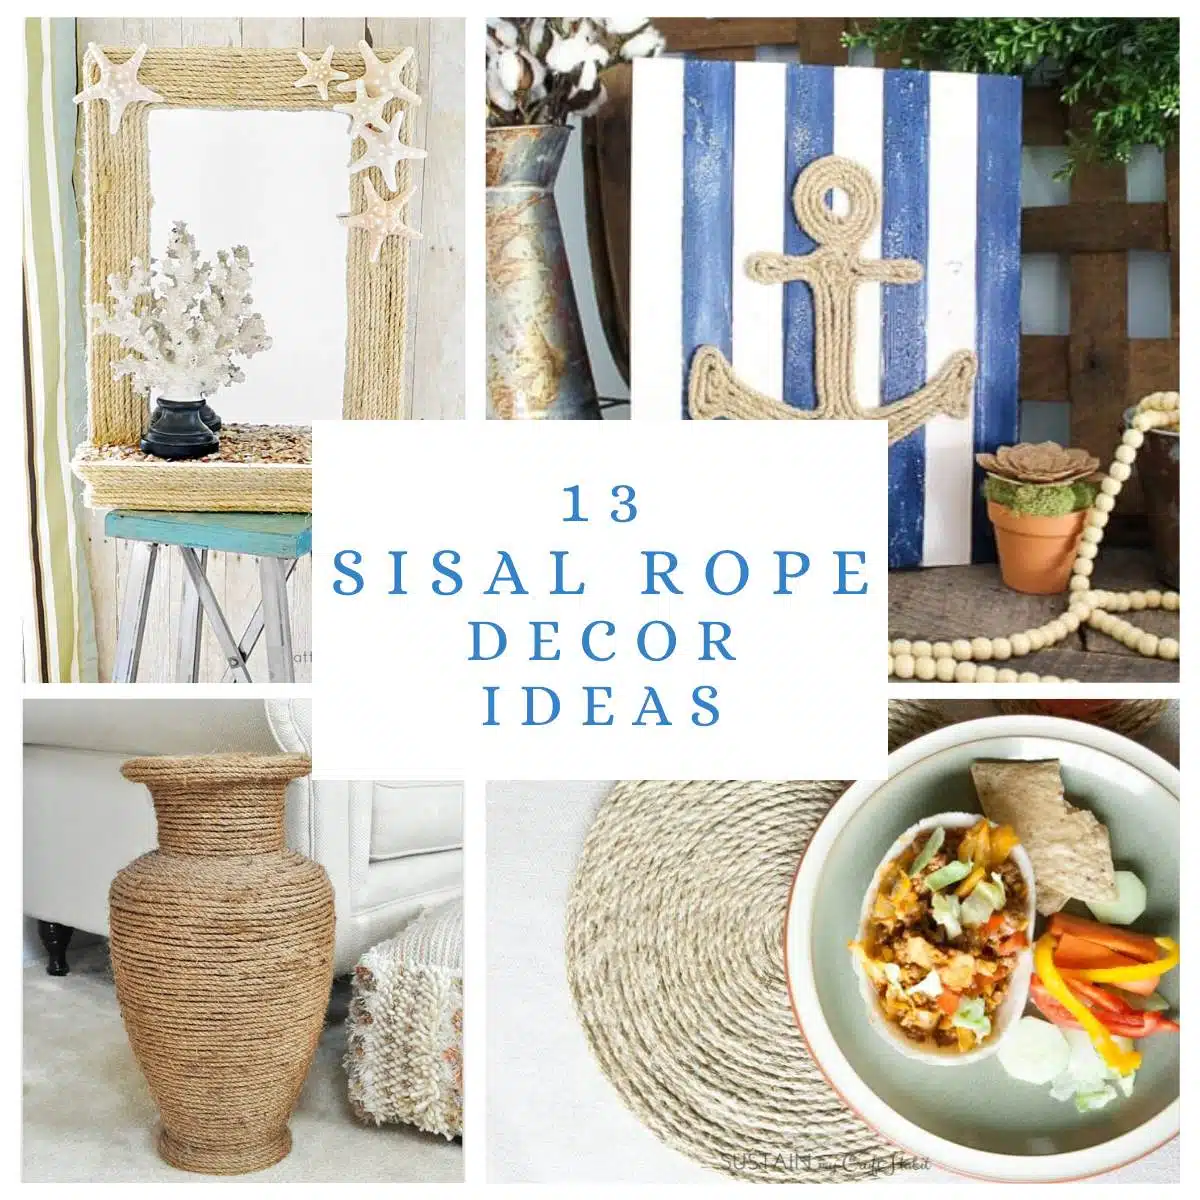 13 Sisal Rope Decor Ideas For Summer Decorating